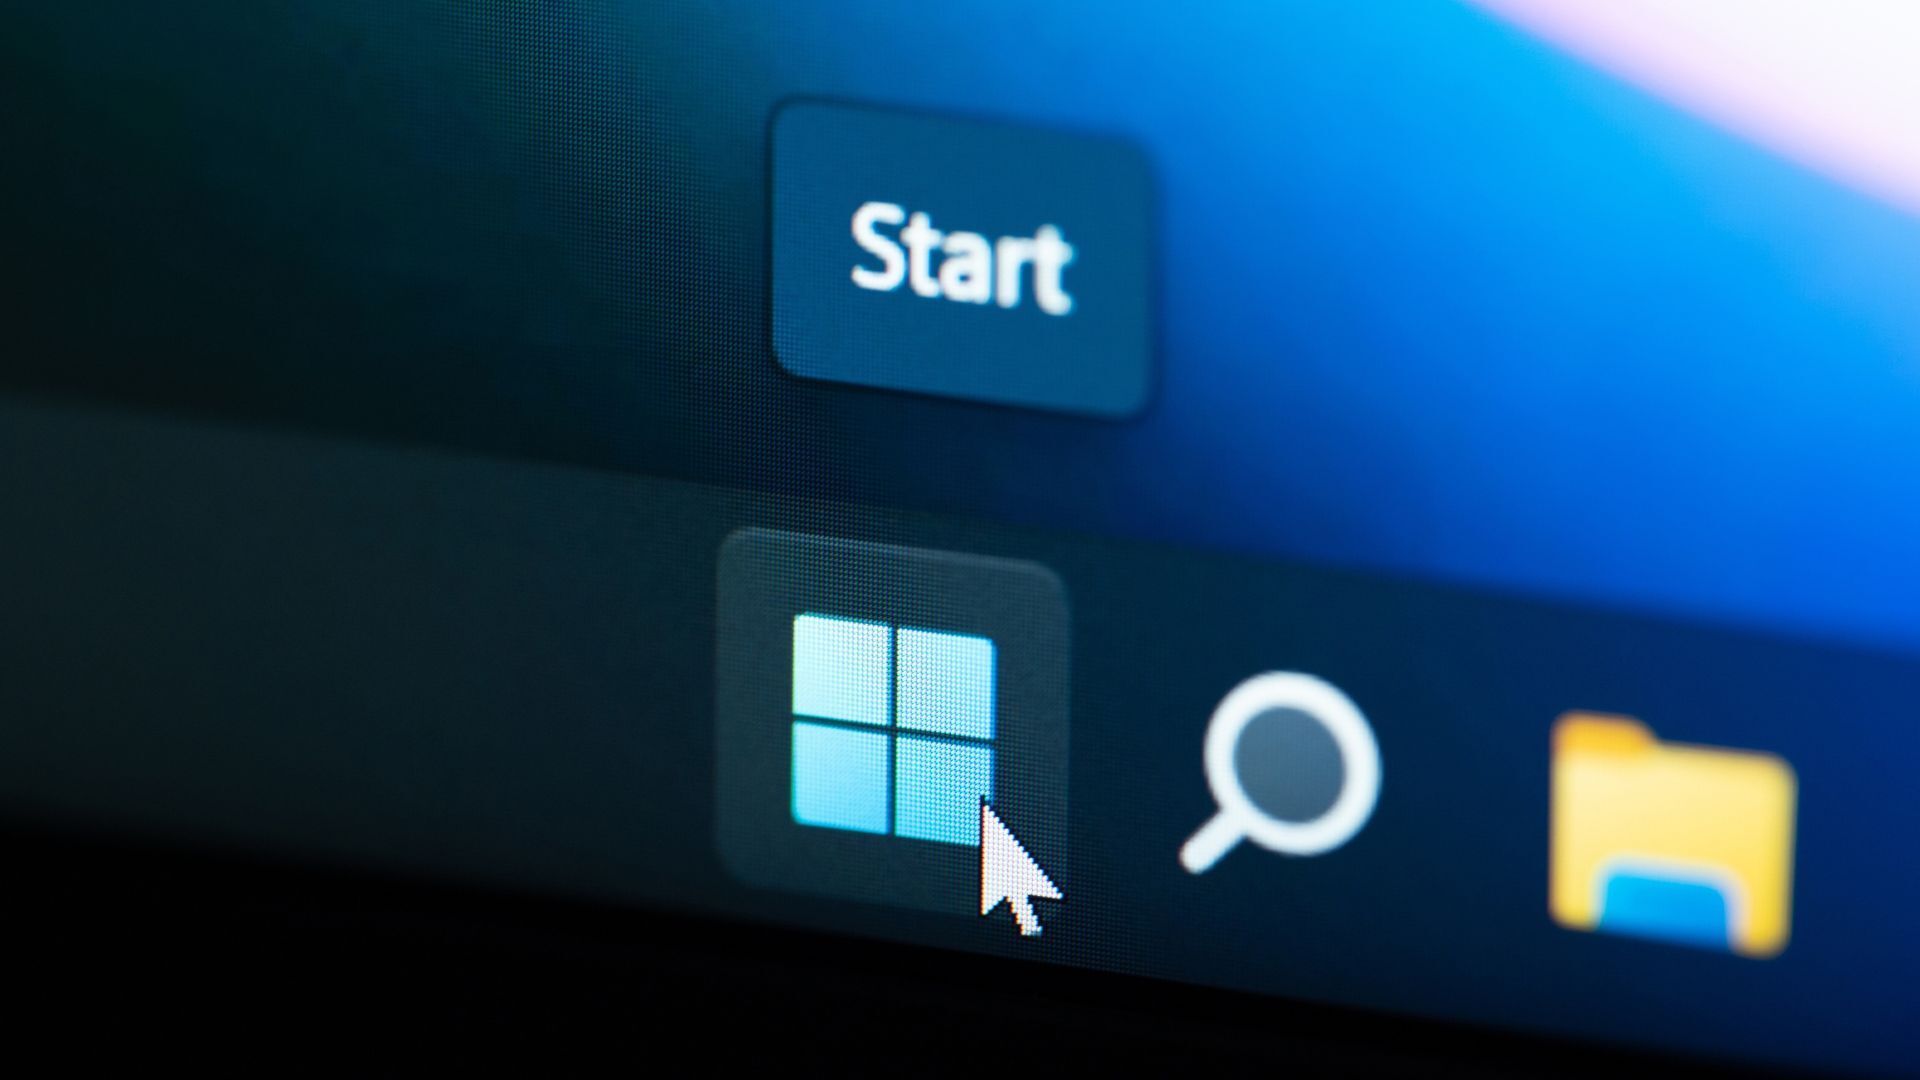 Microsoft Wants to Show You Ads in the Windows 11 Start Menu [Video]